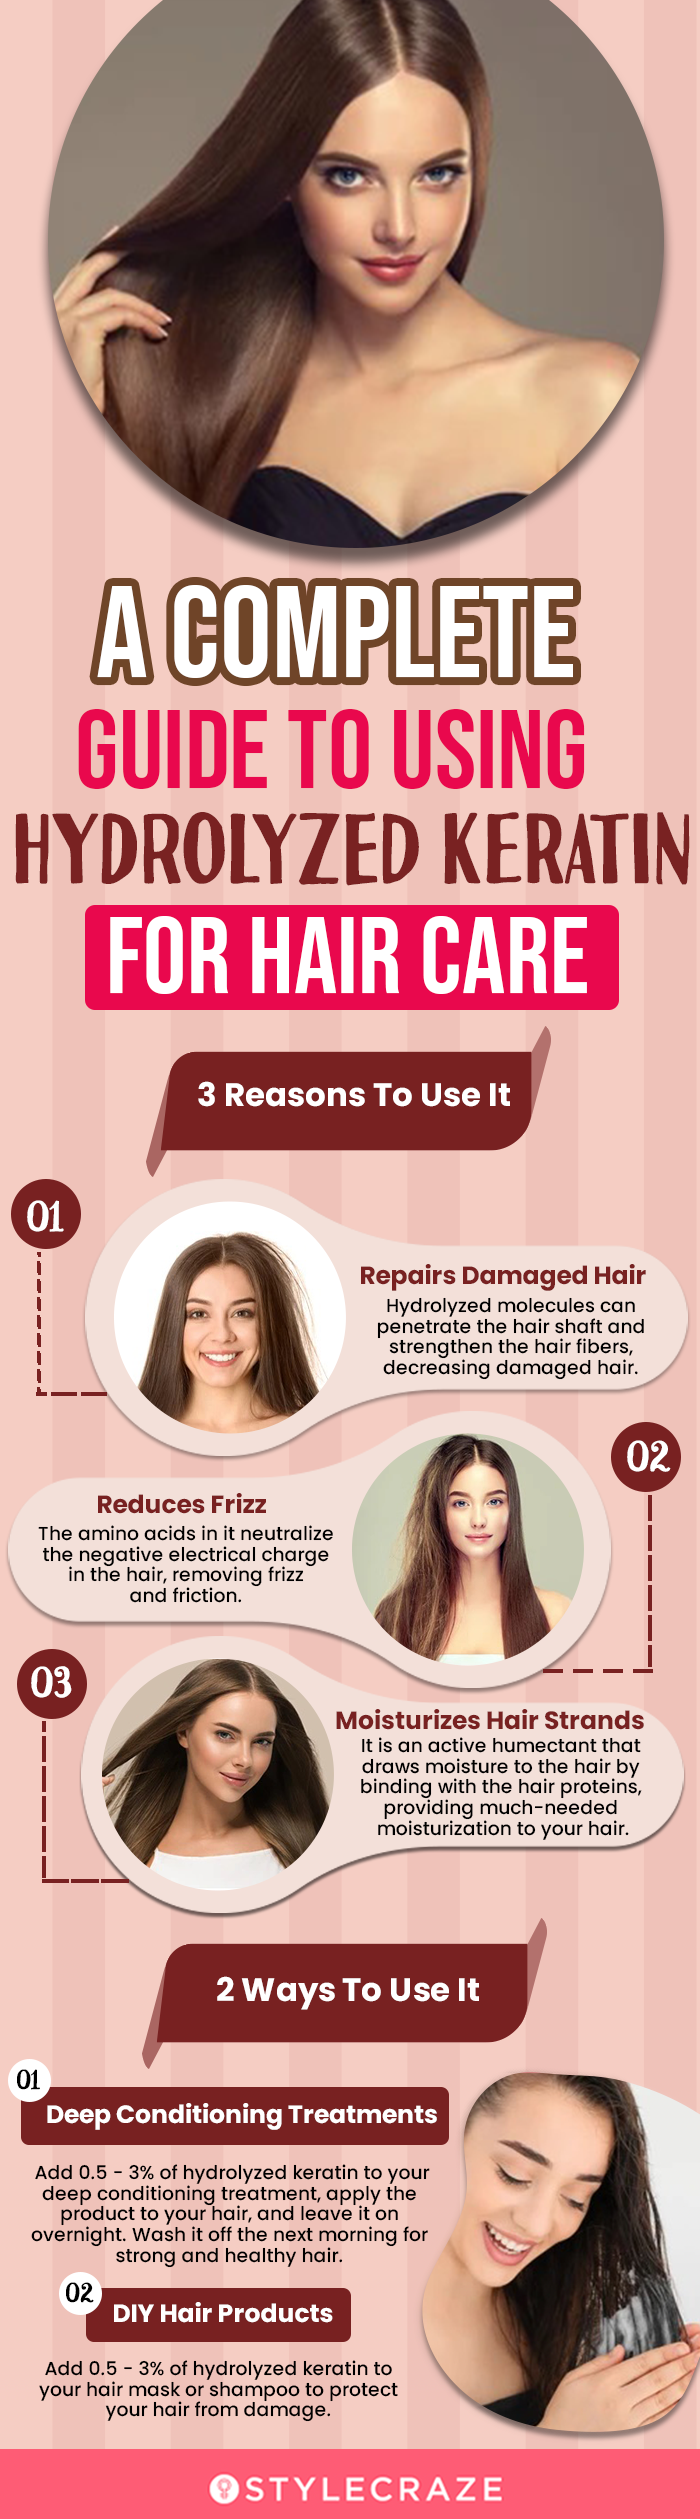 a complete guide to hydrolyzed keratin for hair (infographic)